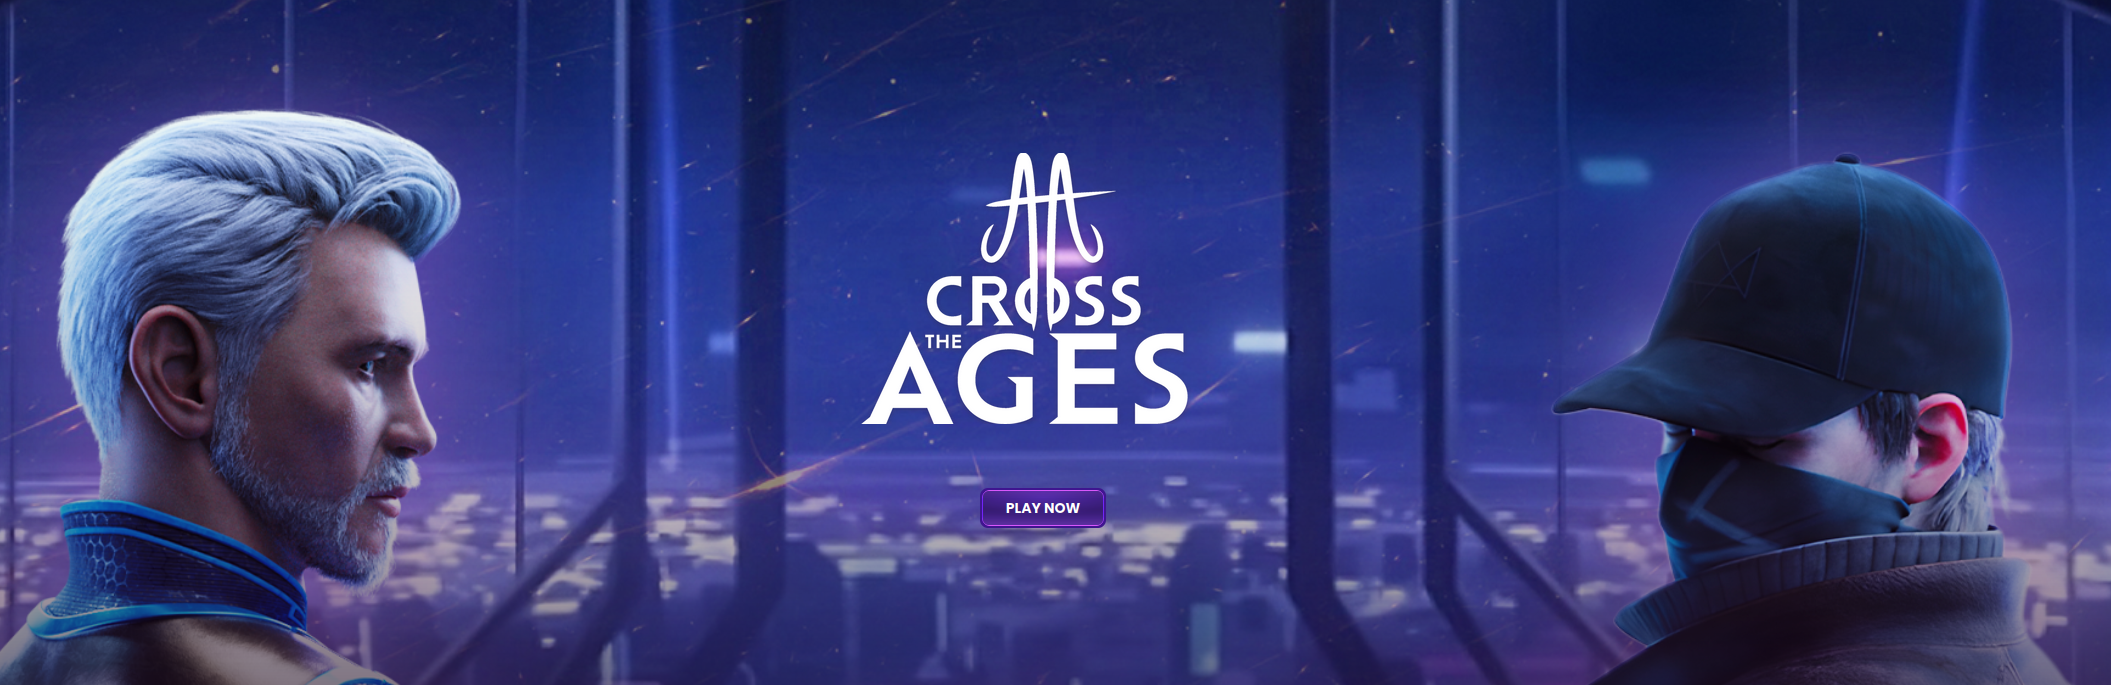 CROSS THE AGES secures $3.5M in equity round led by Animoca Brands